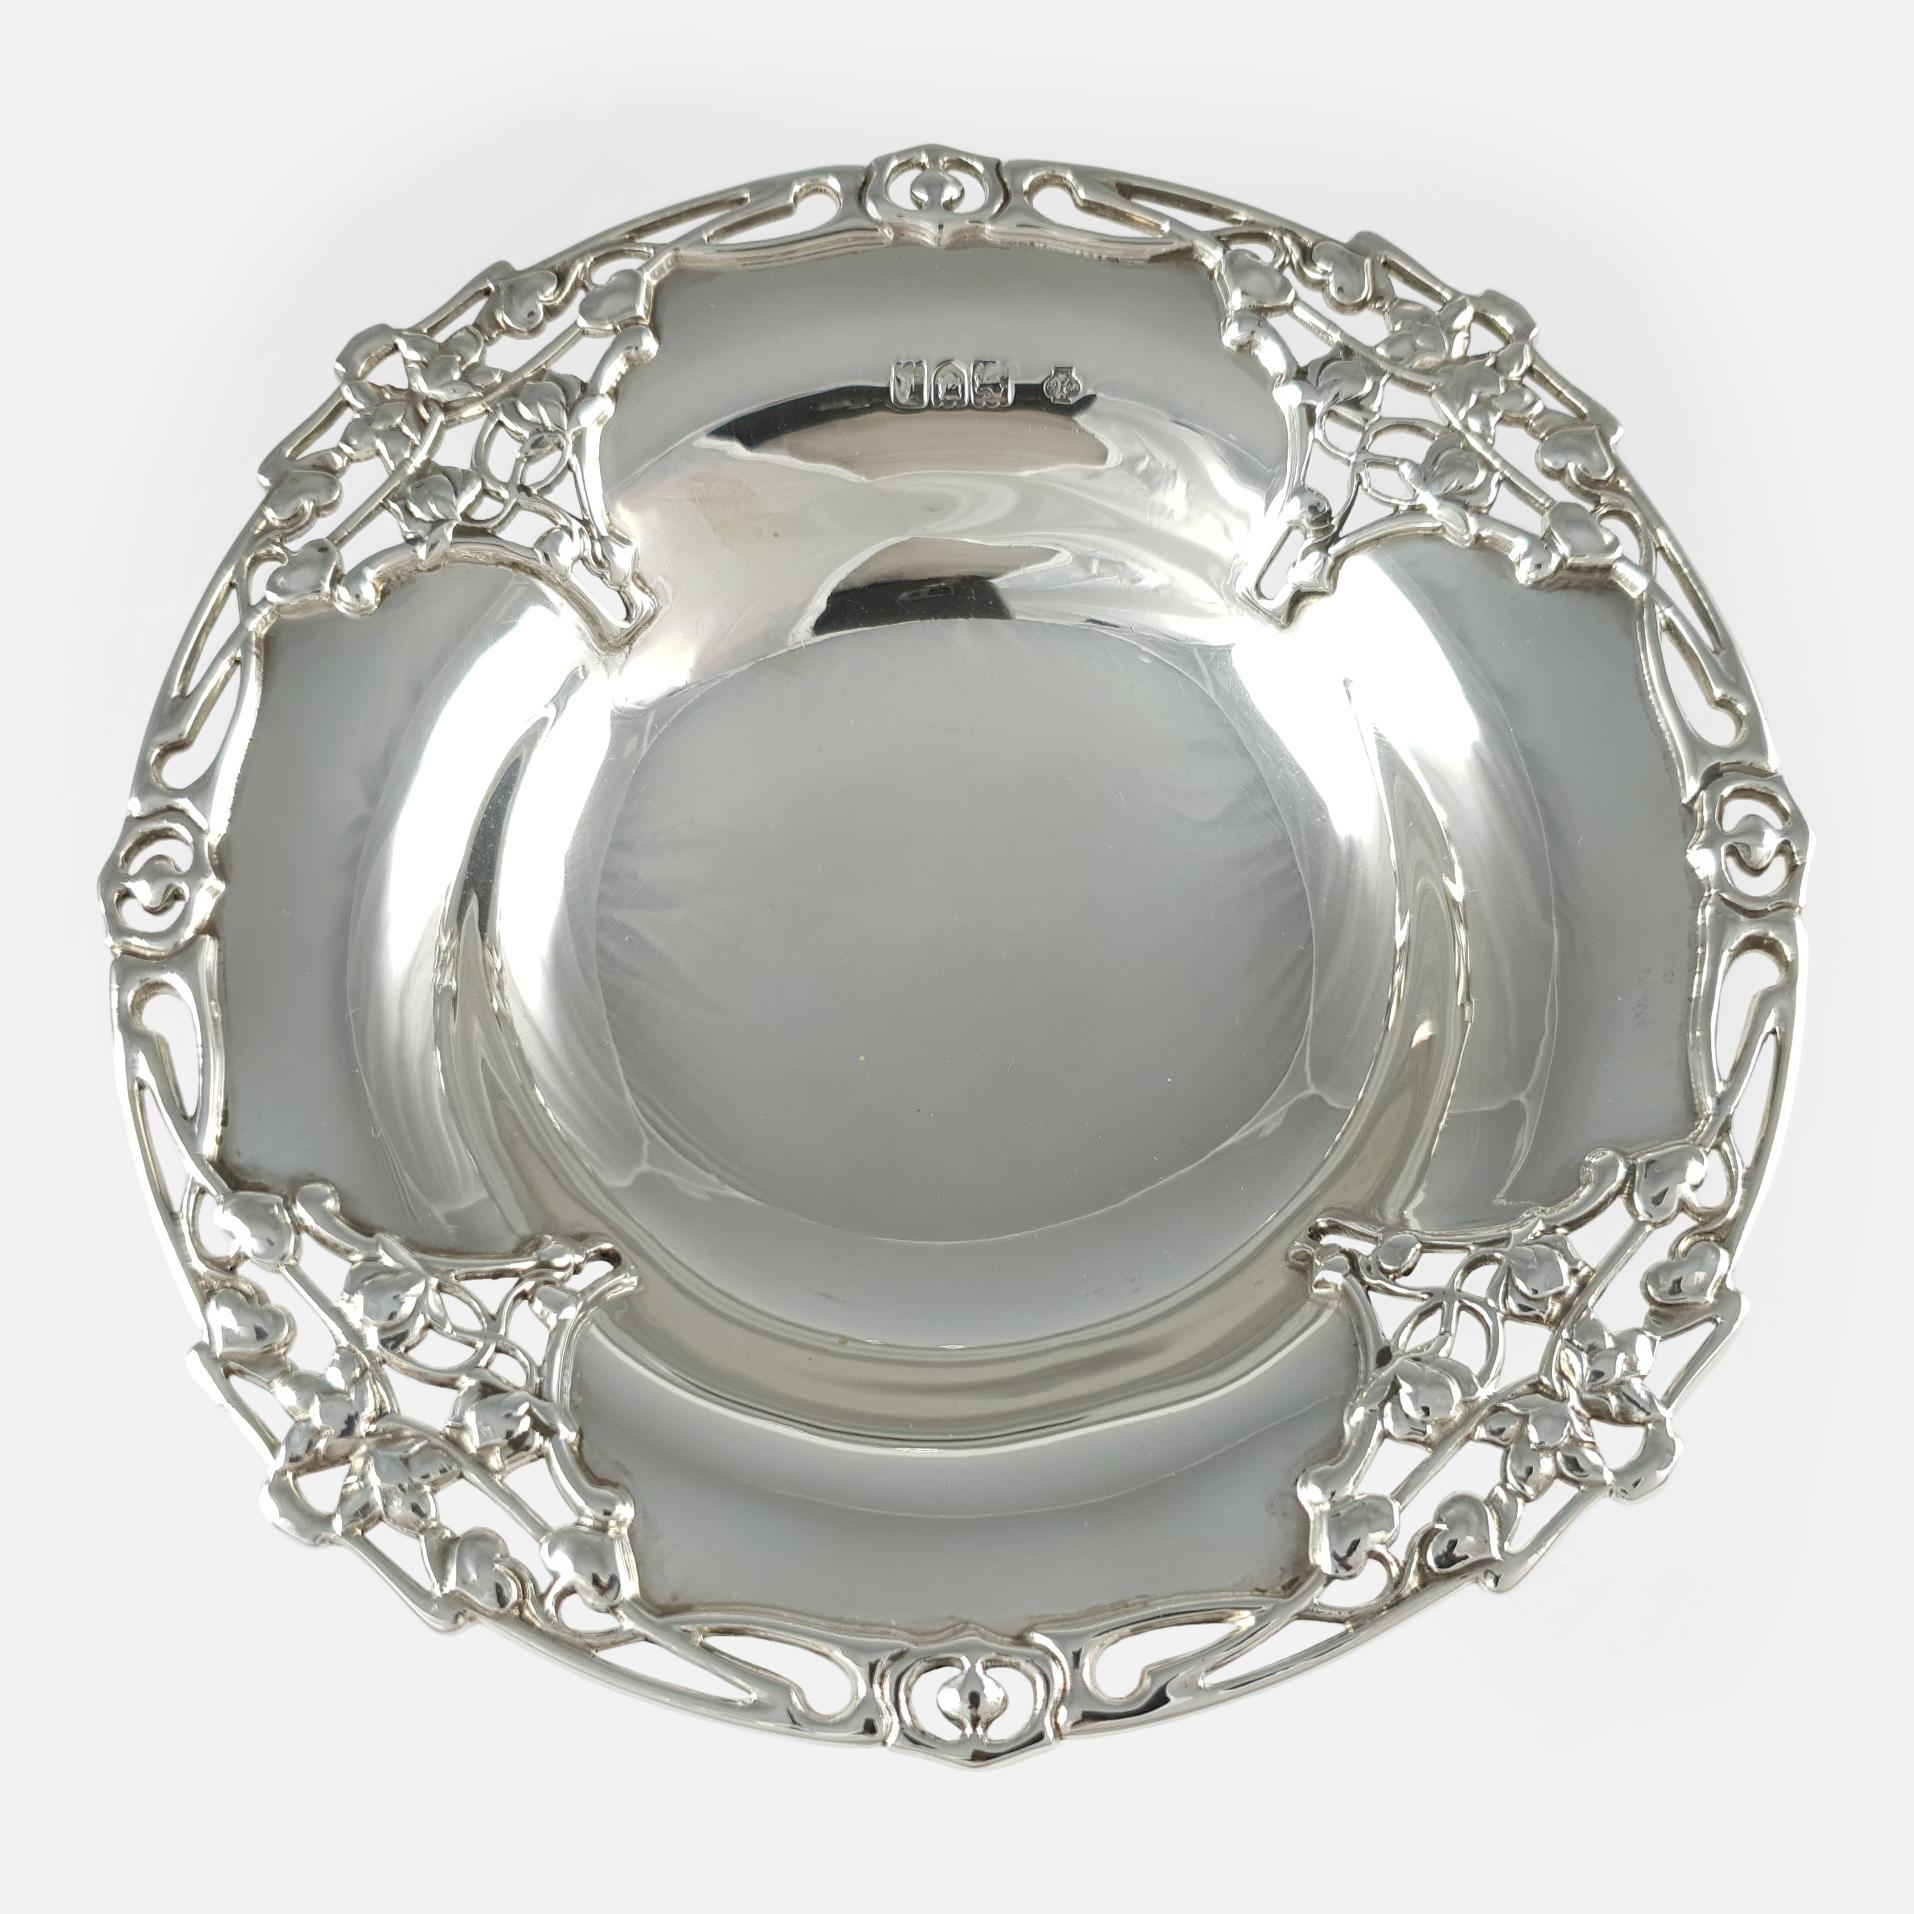 An Edwardian Art Nouveau sterling silver Tazza by William Hutton & Sons, Sheffield 1906. The Tazza is of circular form, with a pierced foliate border sitting on four pierced legs, with a detachable bowl. The Tazza is hallmarked with the makers mark